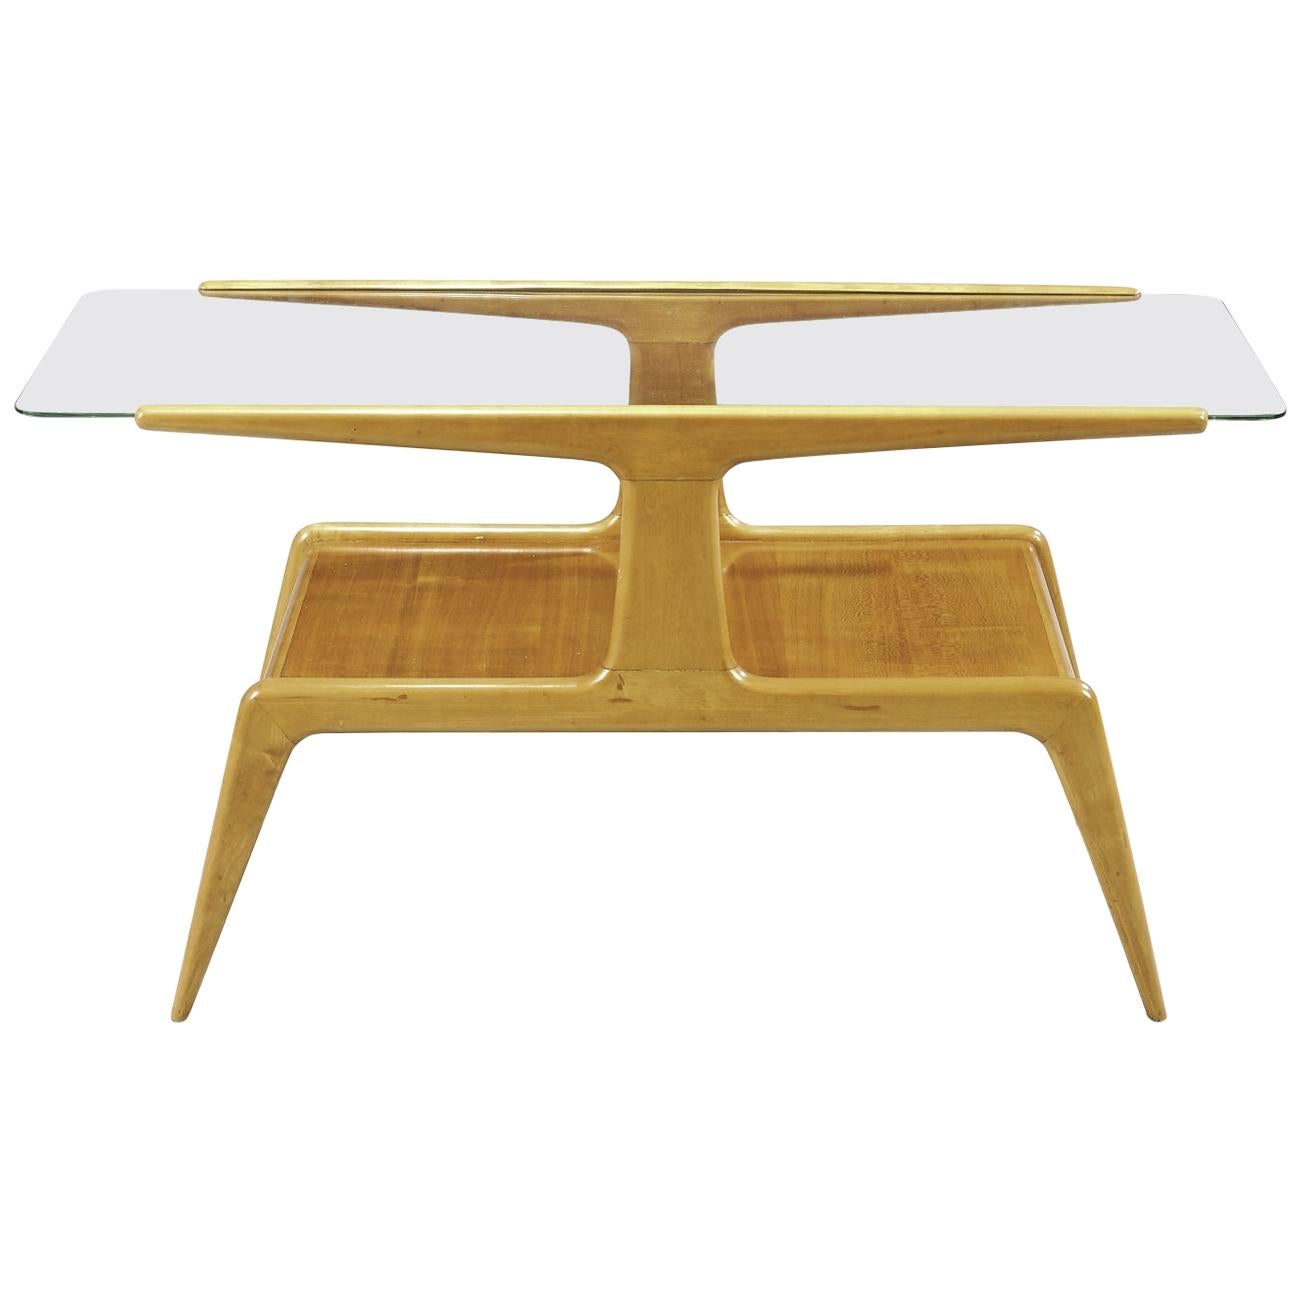 Gio Ponti Wooden and Crystal Coffee Table with Two Shelves from 1950s